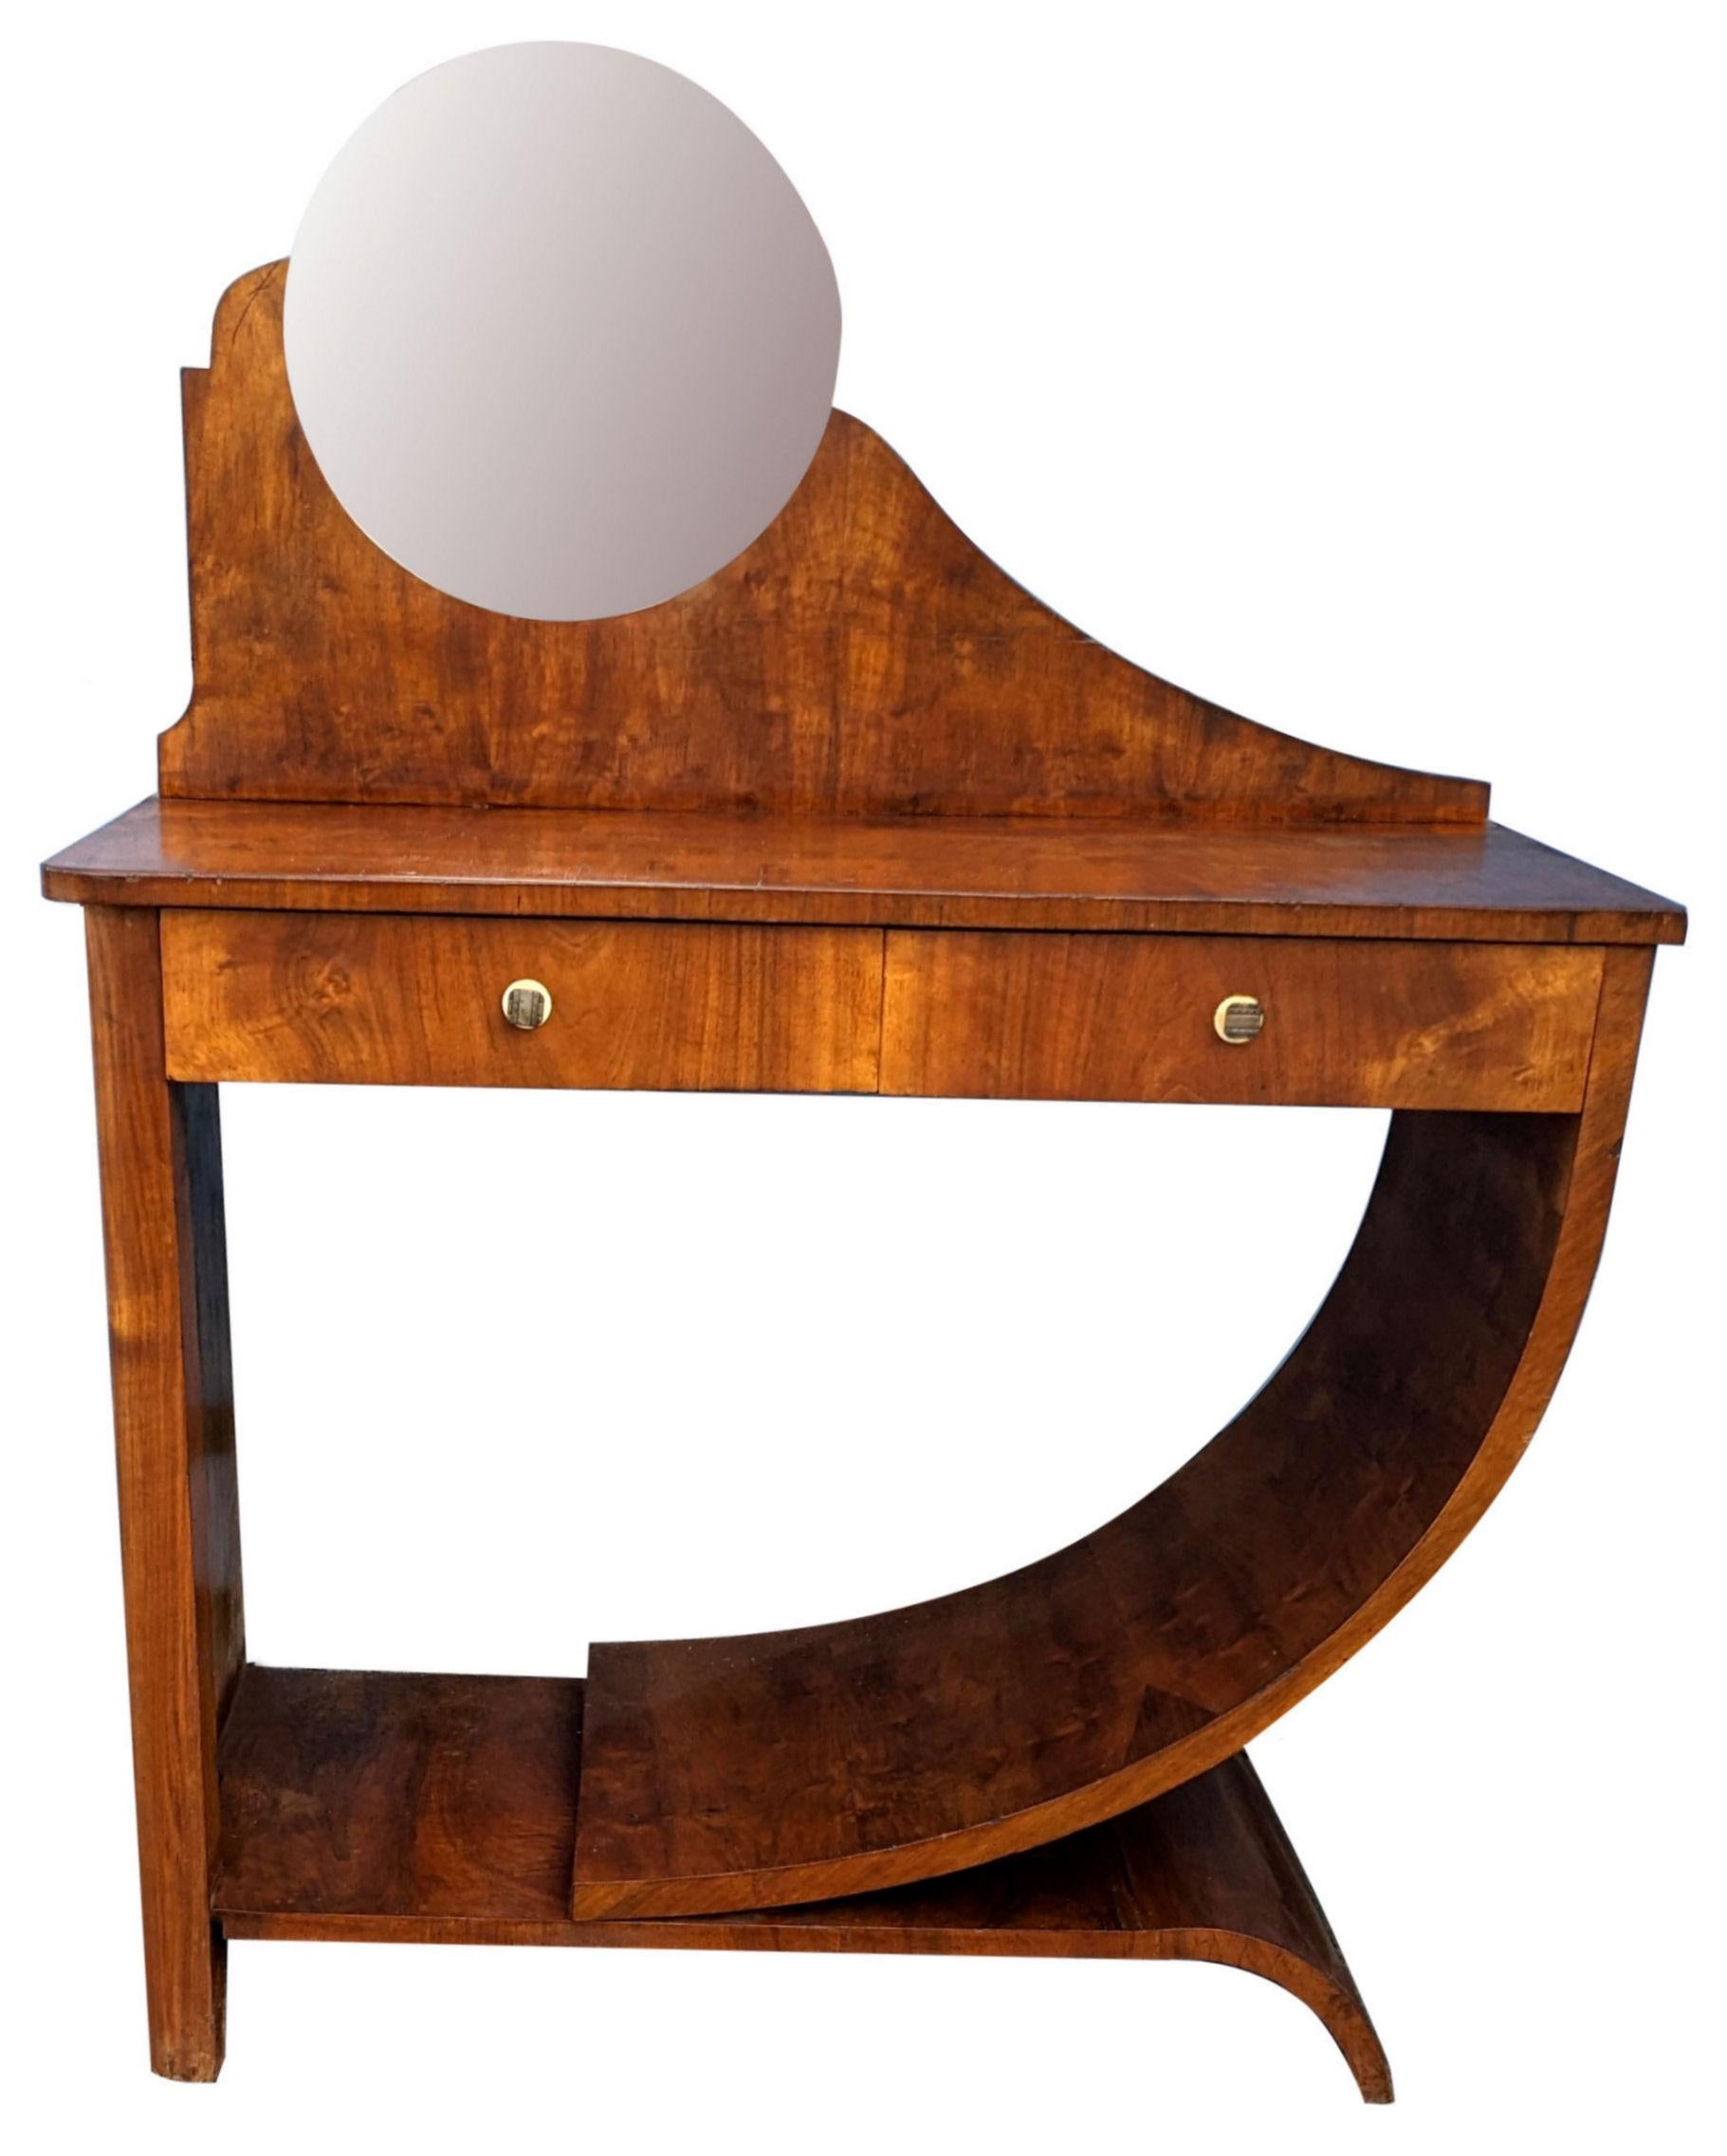 For your consideration is this original 1930s Art Deco Walnut dressing table. Originating from England and oozing everything about this wonderful bygone era we've all come to love and admire, this dressing table is one not to be missed! Veneered in